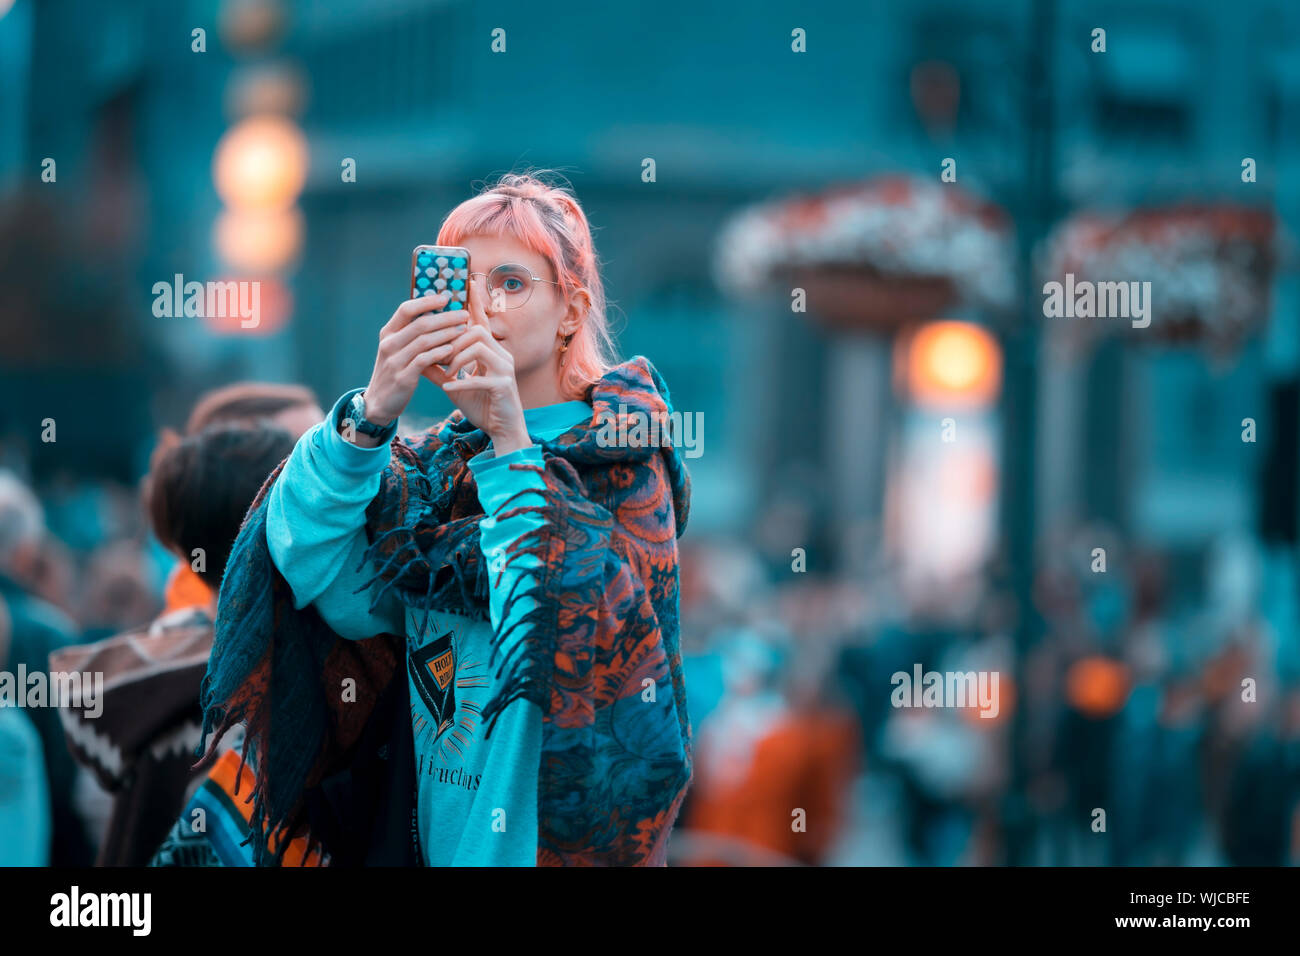 Girl taking a picture with a smart phone, Menningarnott or Cultural day, Reykjavik, Iceland. Stock Photo